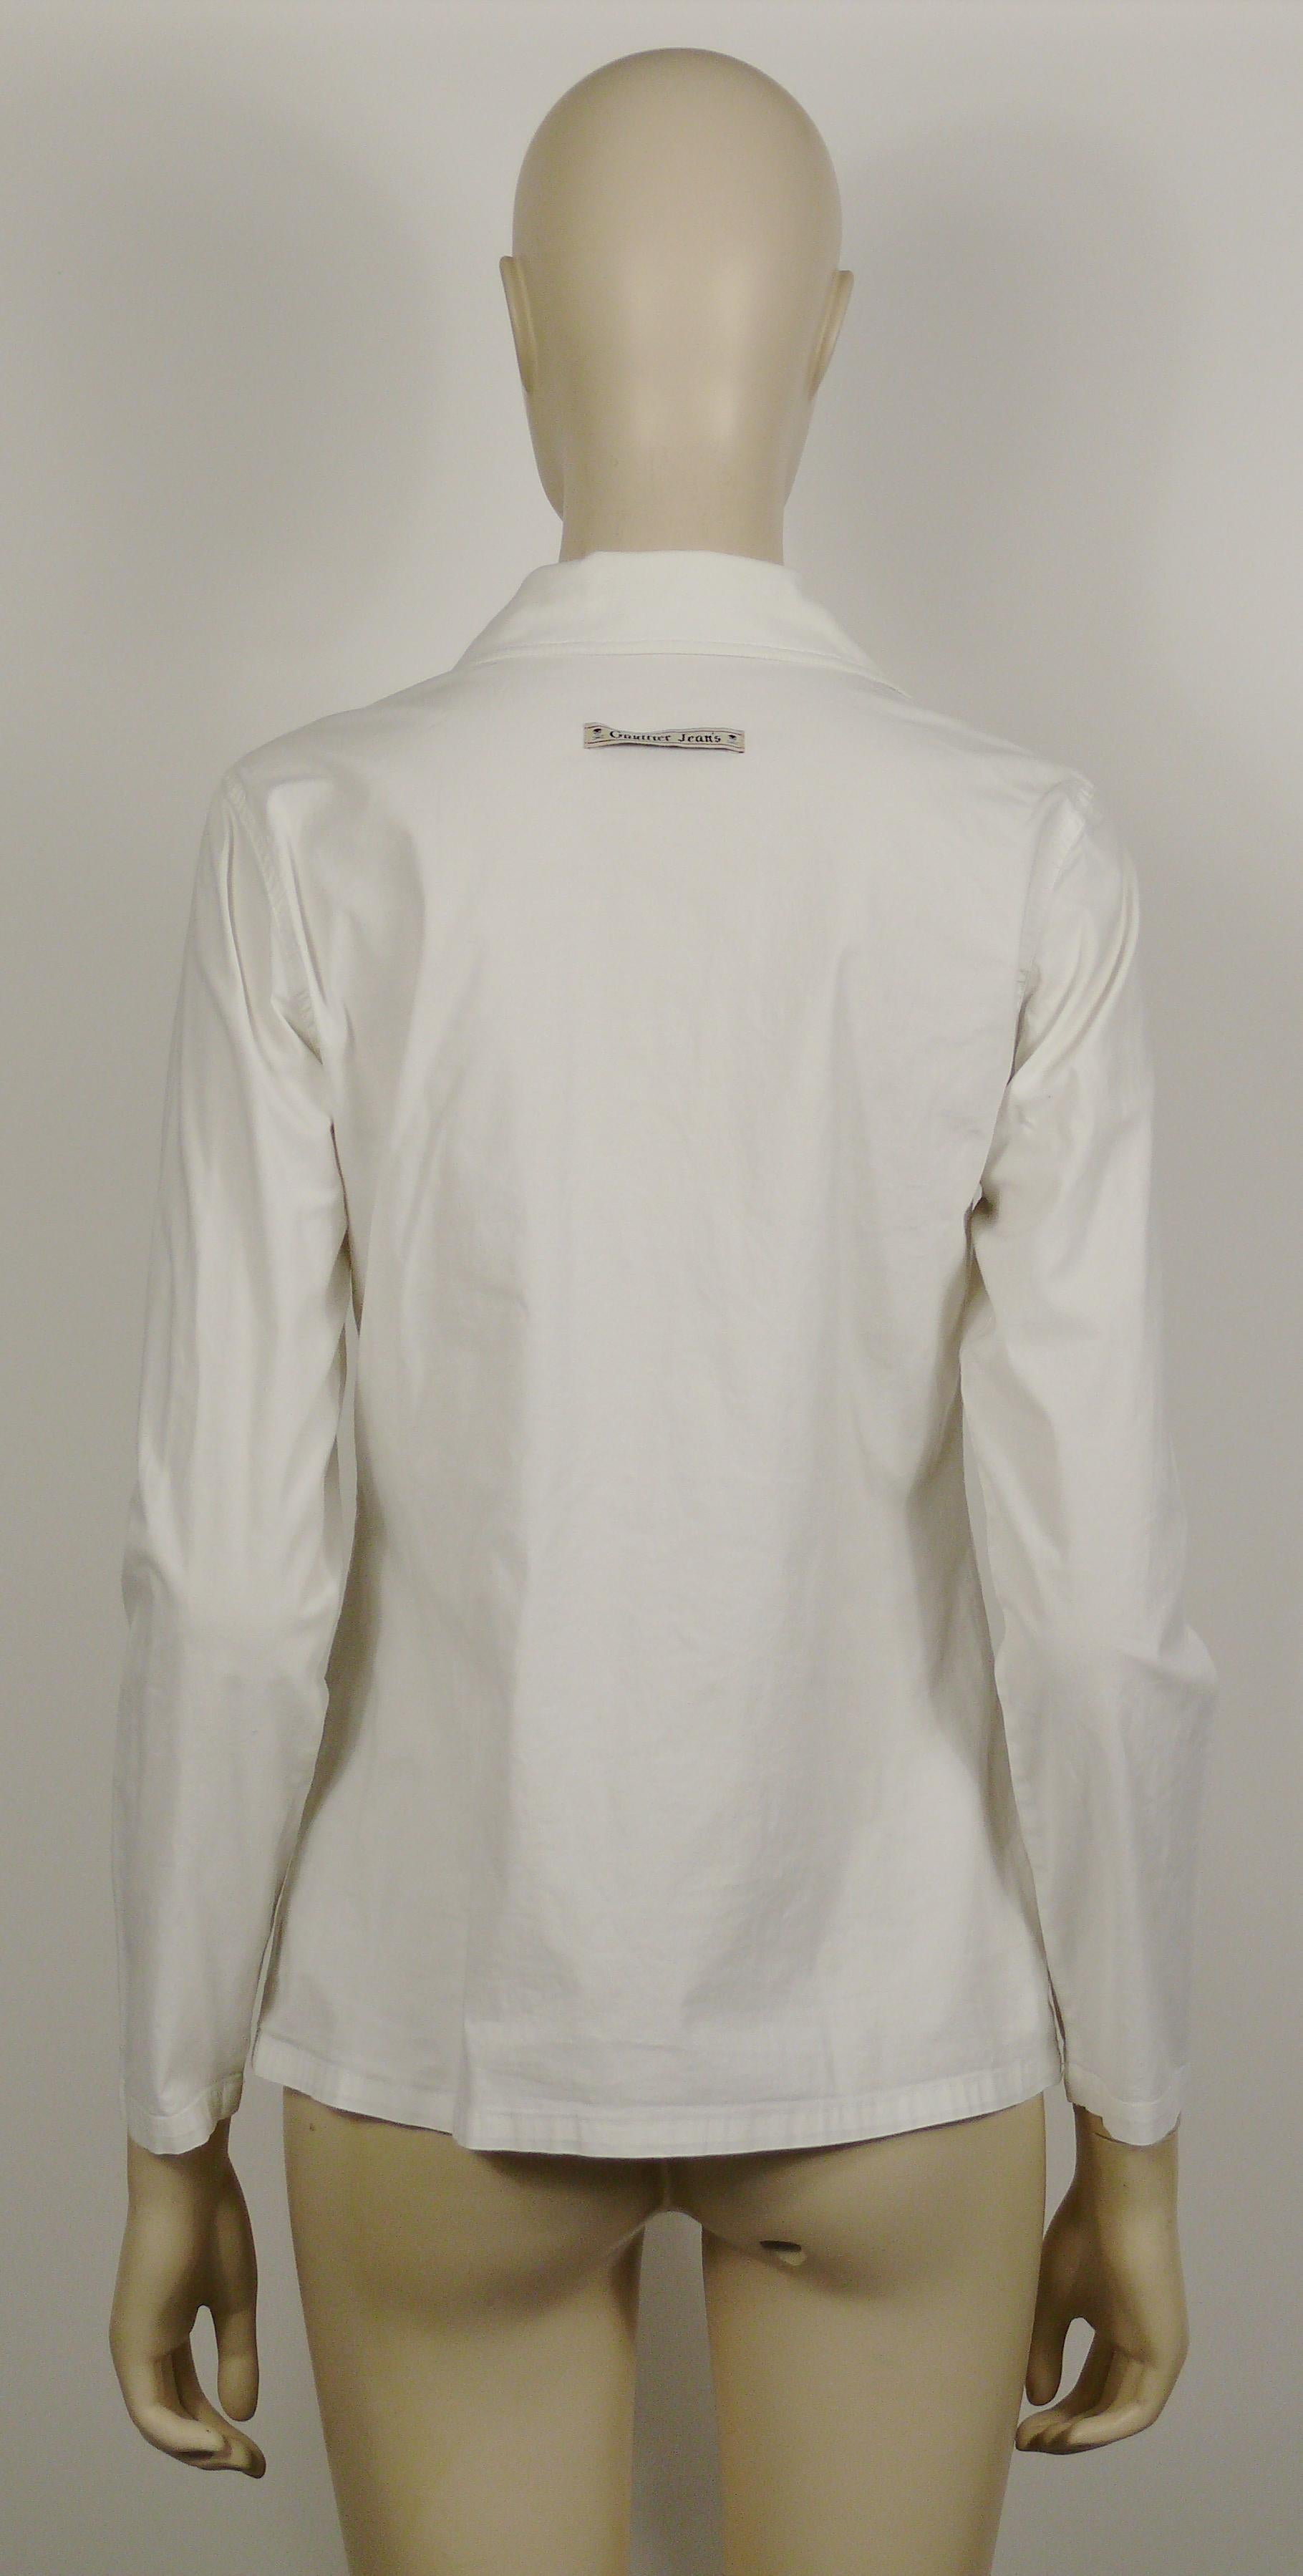 Gray Jean Paul Gaultier Vintage White Safety Pin Shirt